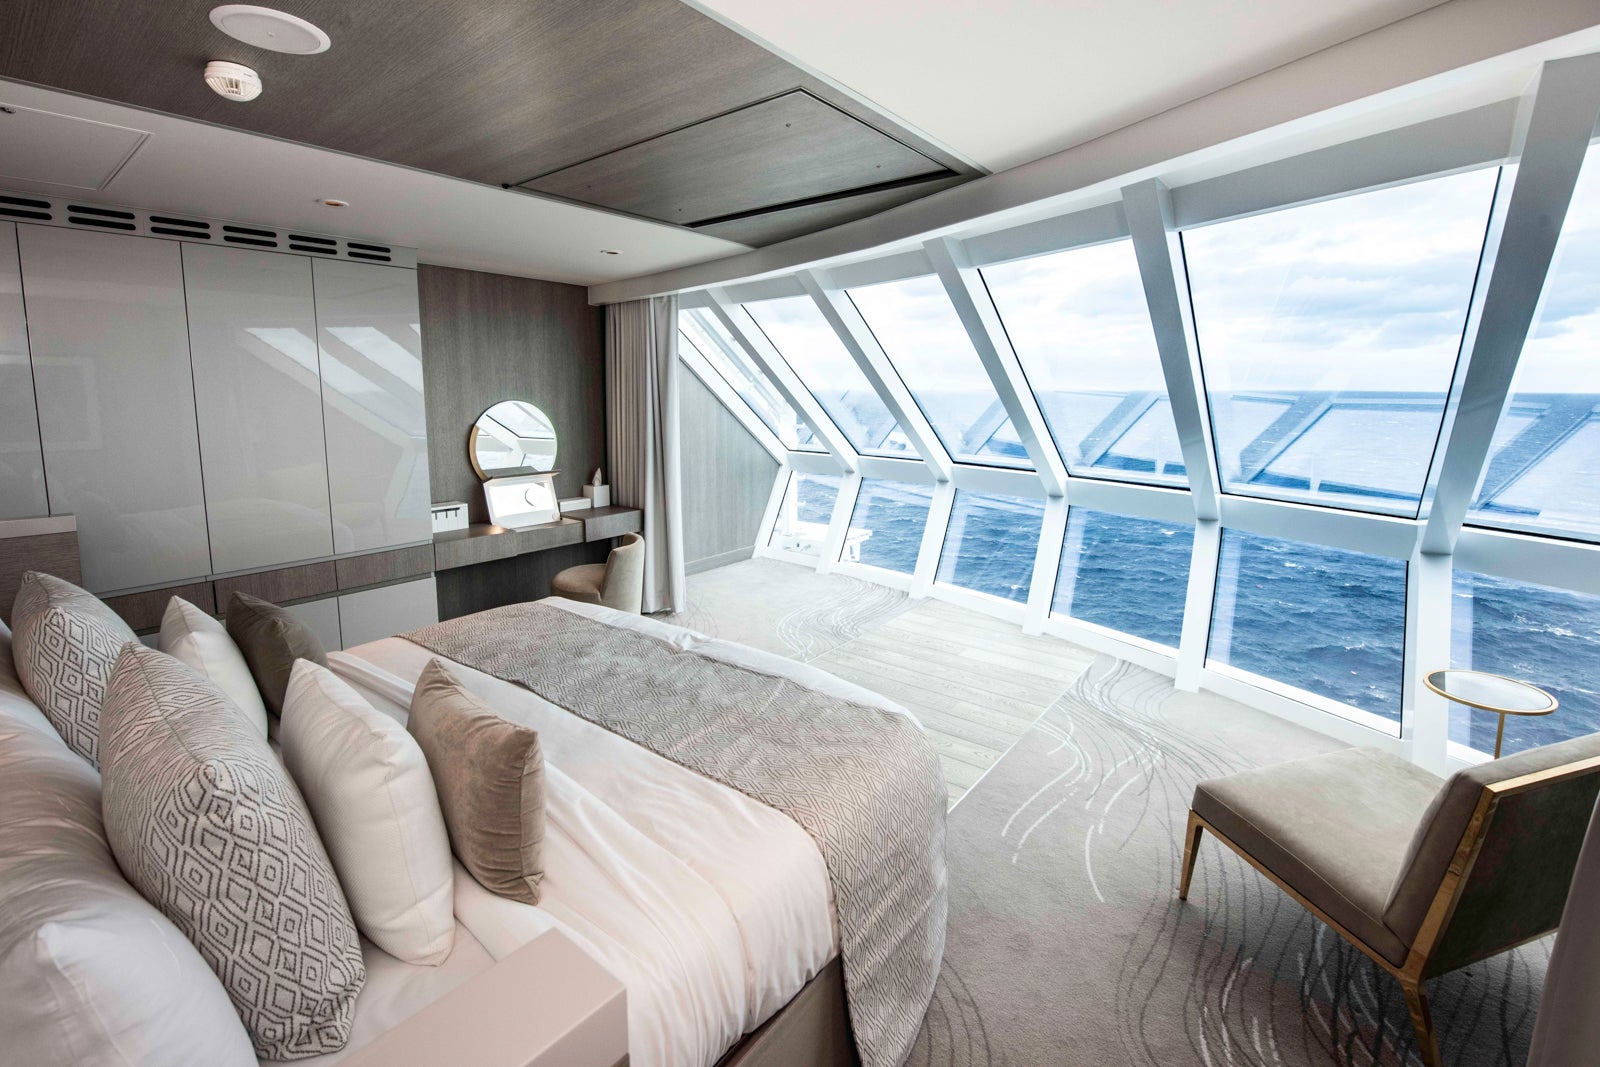 The 5 most desirable cabin locations on any cruise ship